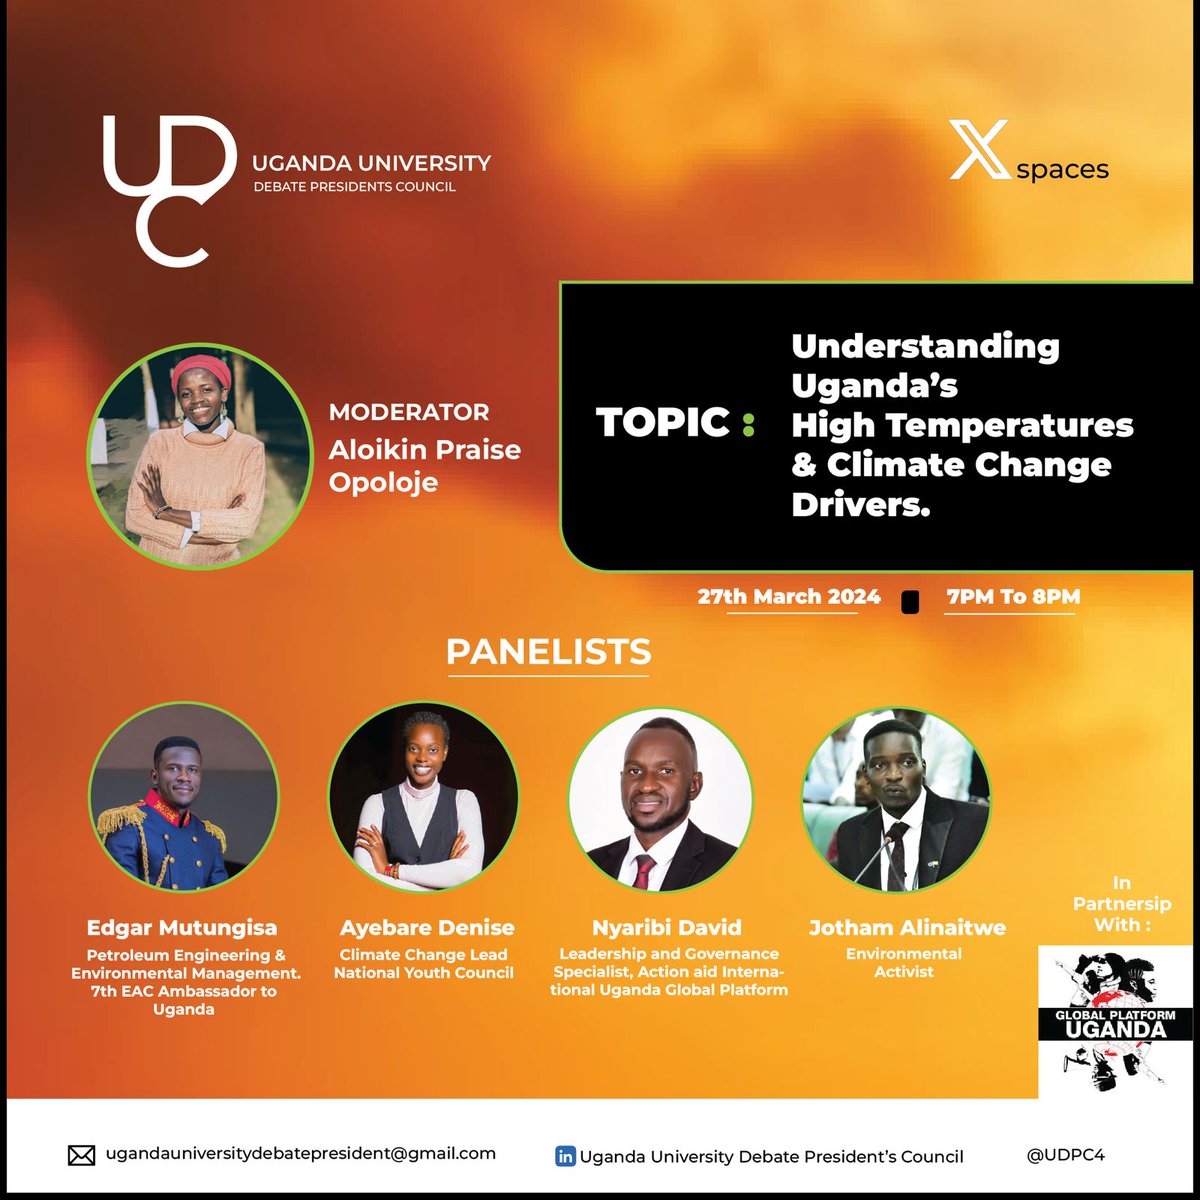 🌍 Join us on 27th March 2023, 7-8pm EAT for discussion on #Uganda's climate challenges! Learn about rising temperatures, Let's build a resilient future together! x.com/i/spaces/1vAxR… @AloikinOpoloje @nyaribi @ReginaAkullu @AyebareDenise @mutungisaedgar1 @global_uganda